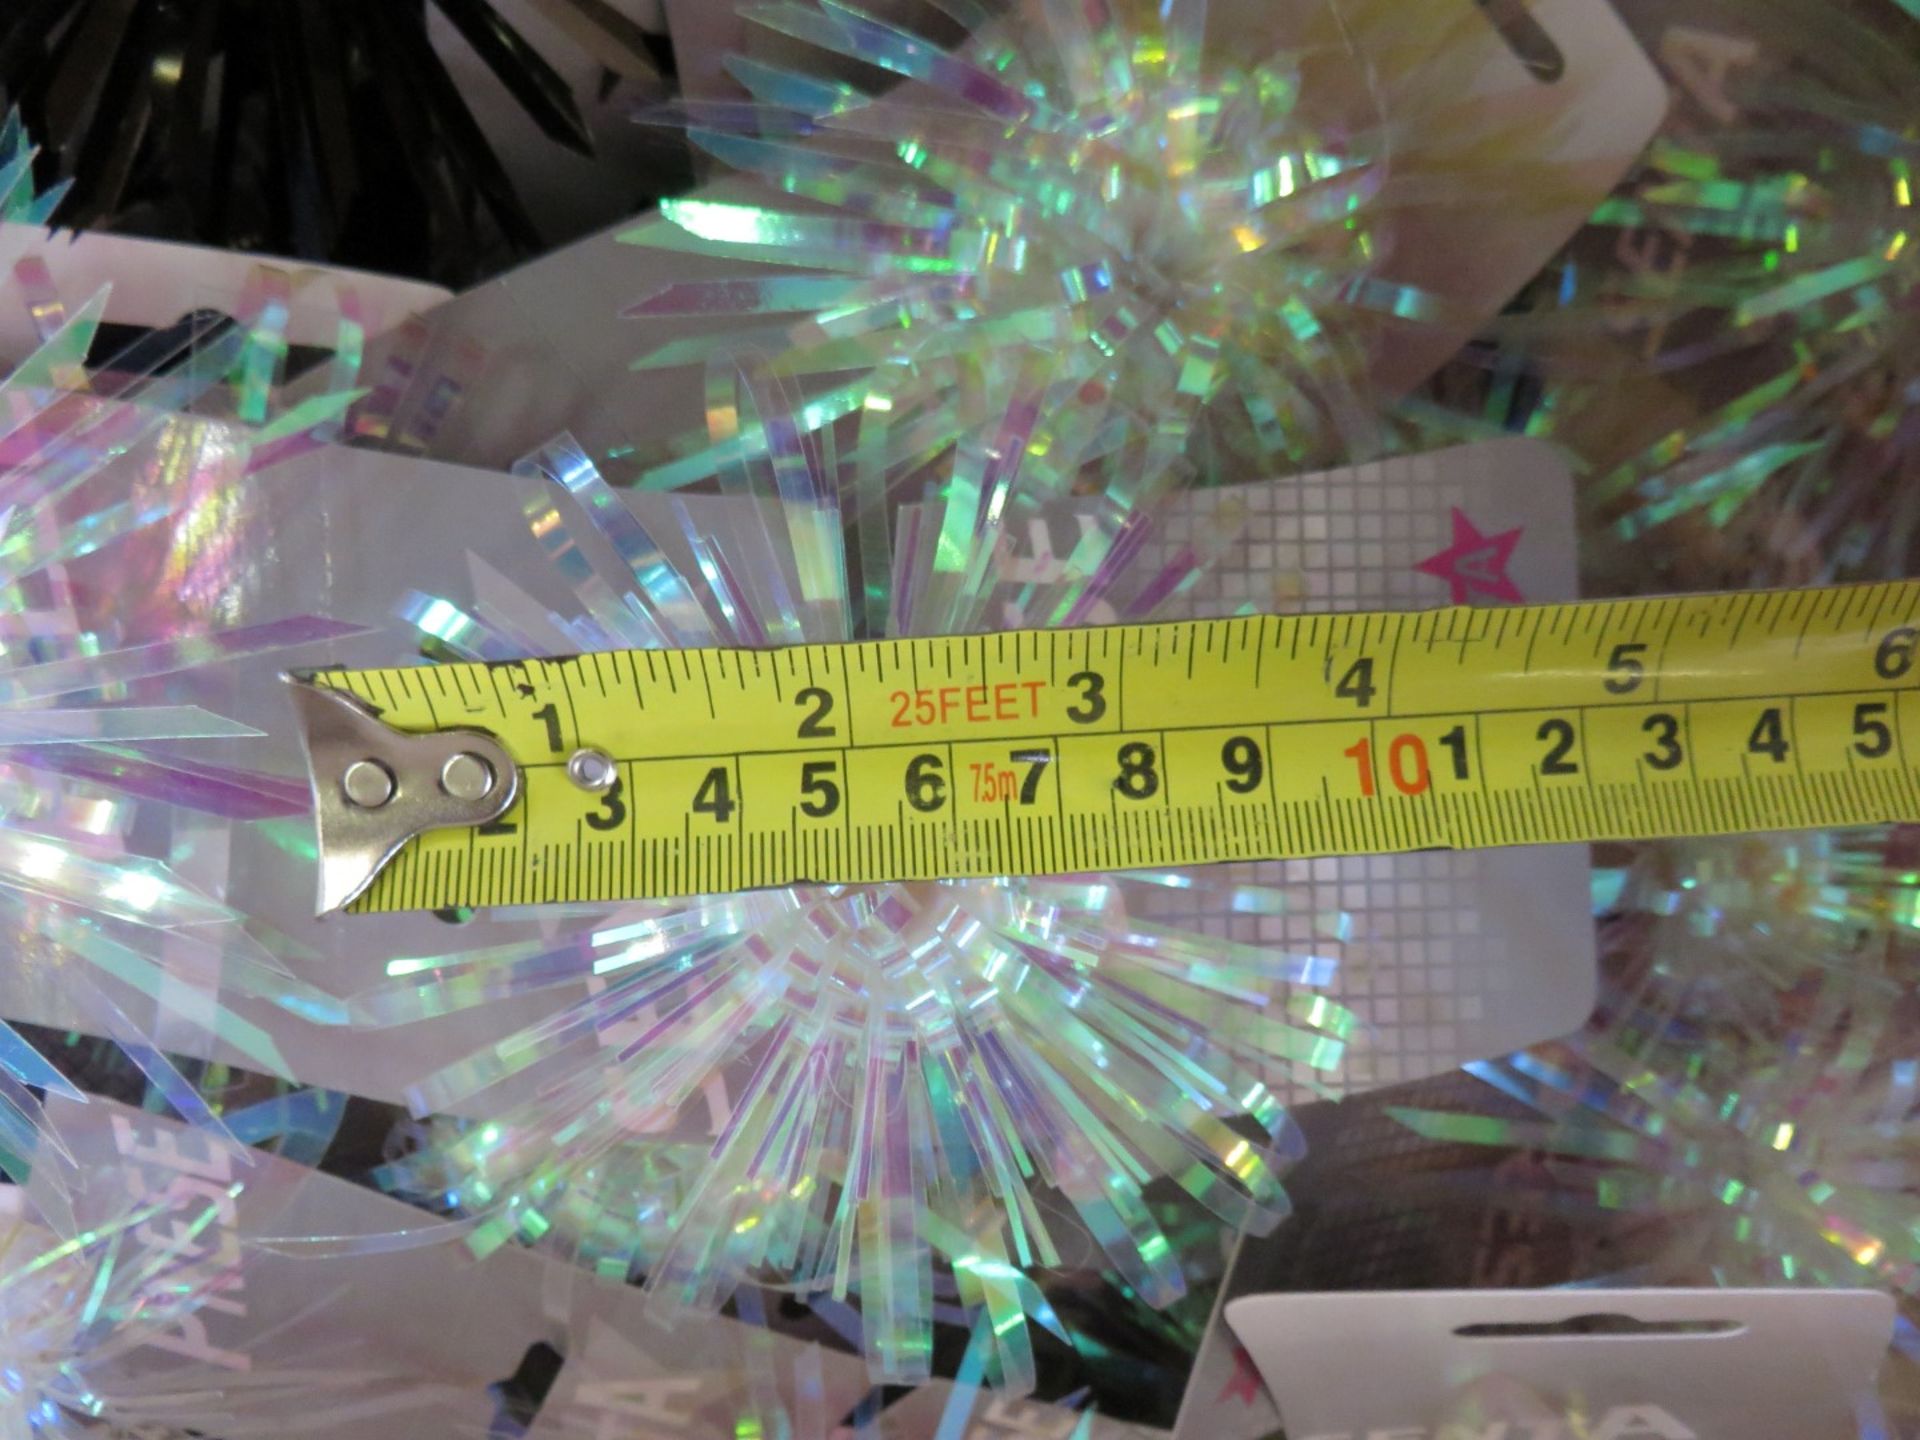 1 x Large Box of New Self-Adhesive Iridescent Present Bows - CL185 - Ref: DSY0256 - Location: Stoke- - Image 4 of 6